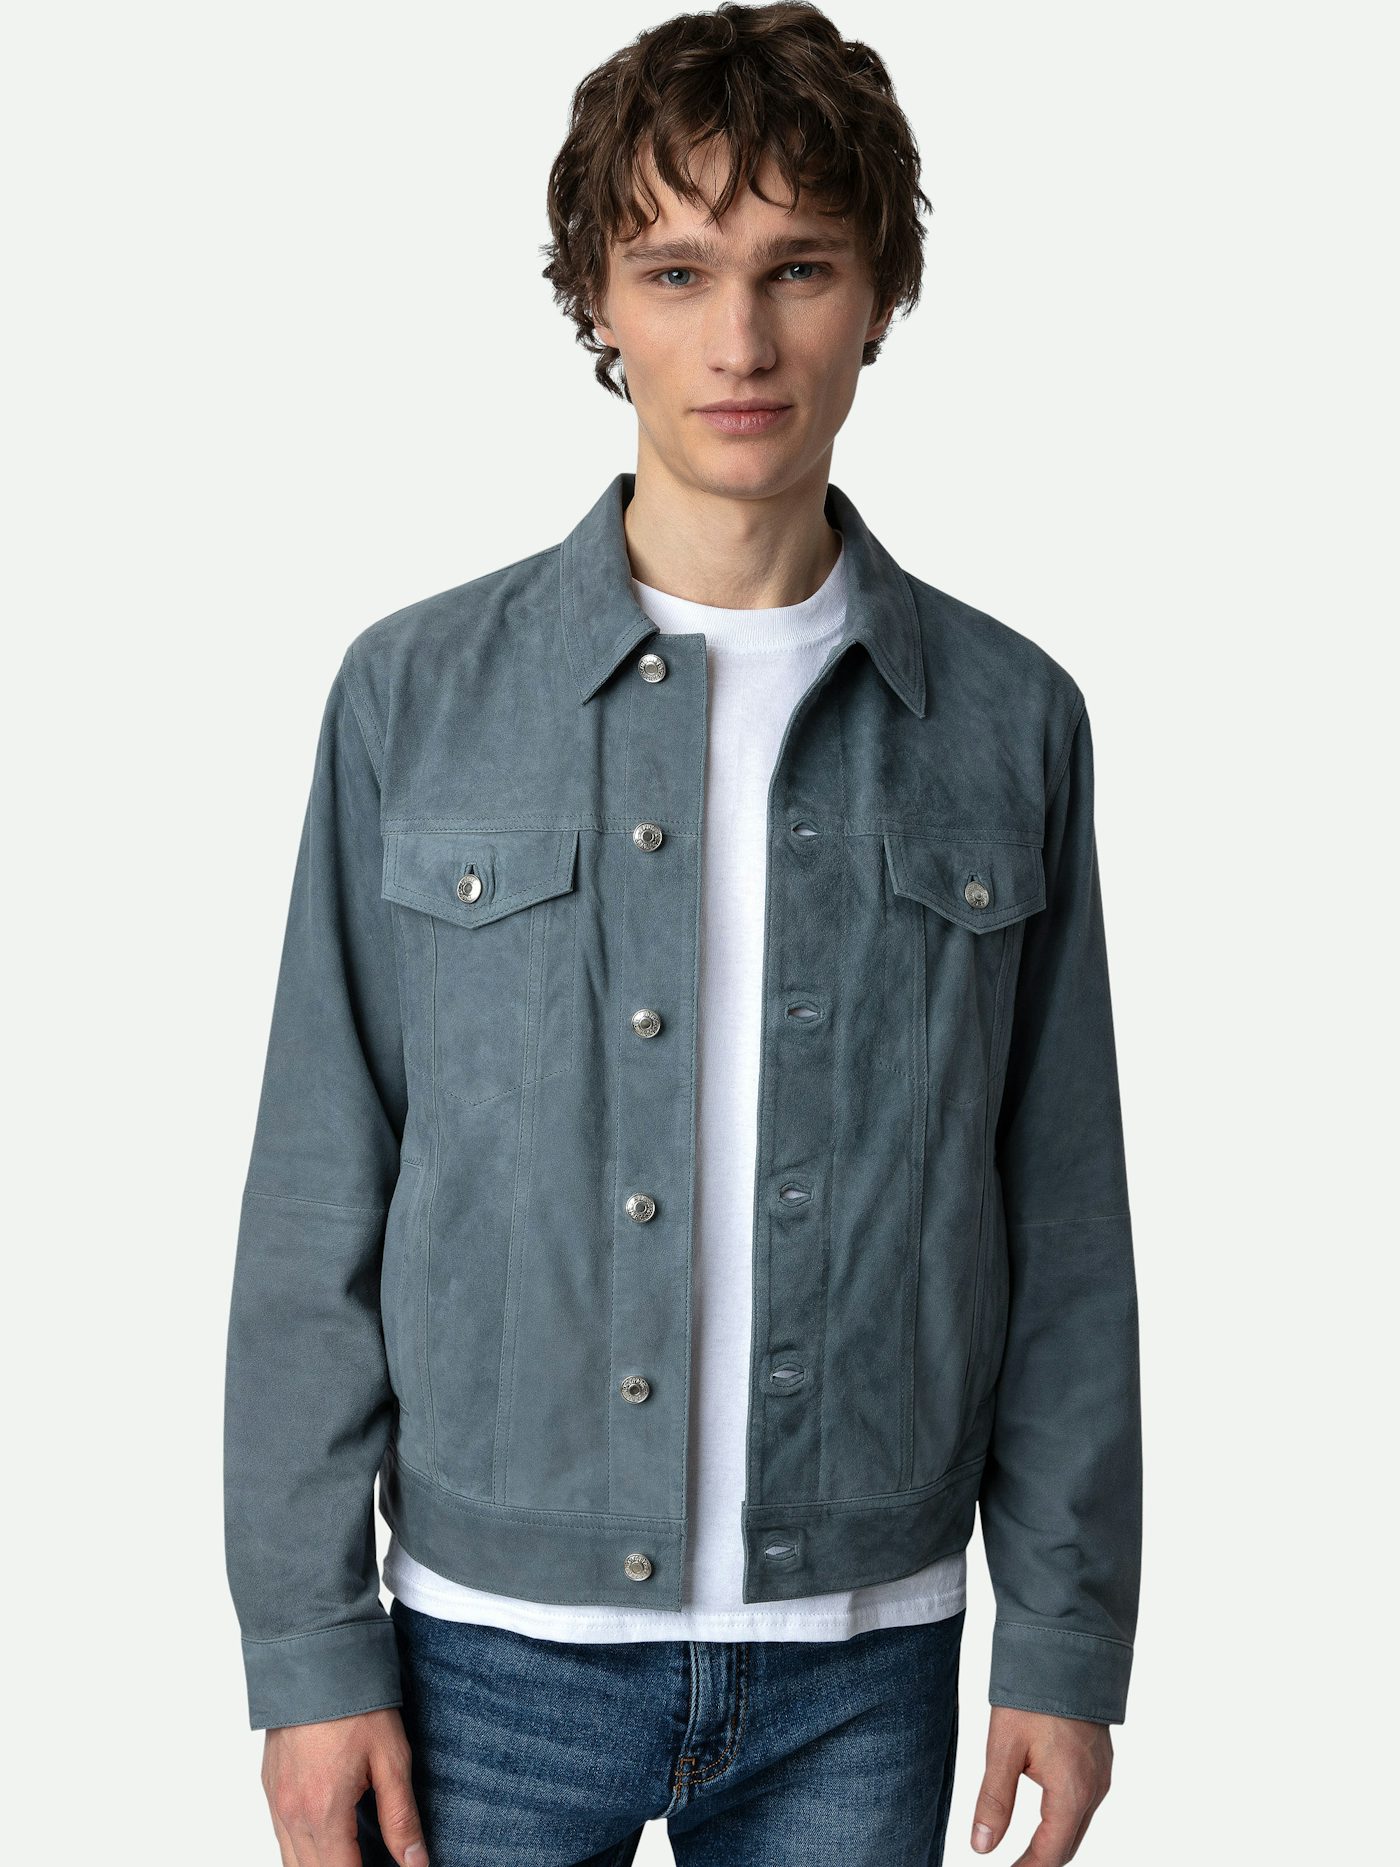 Men’s new chic and trendy clothing | Zadig&Voltaire